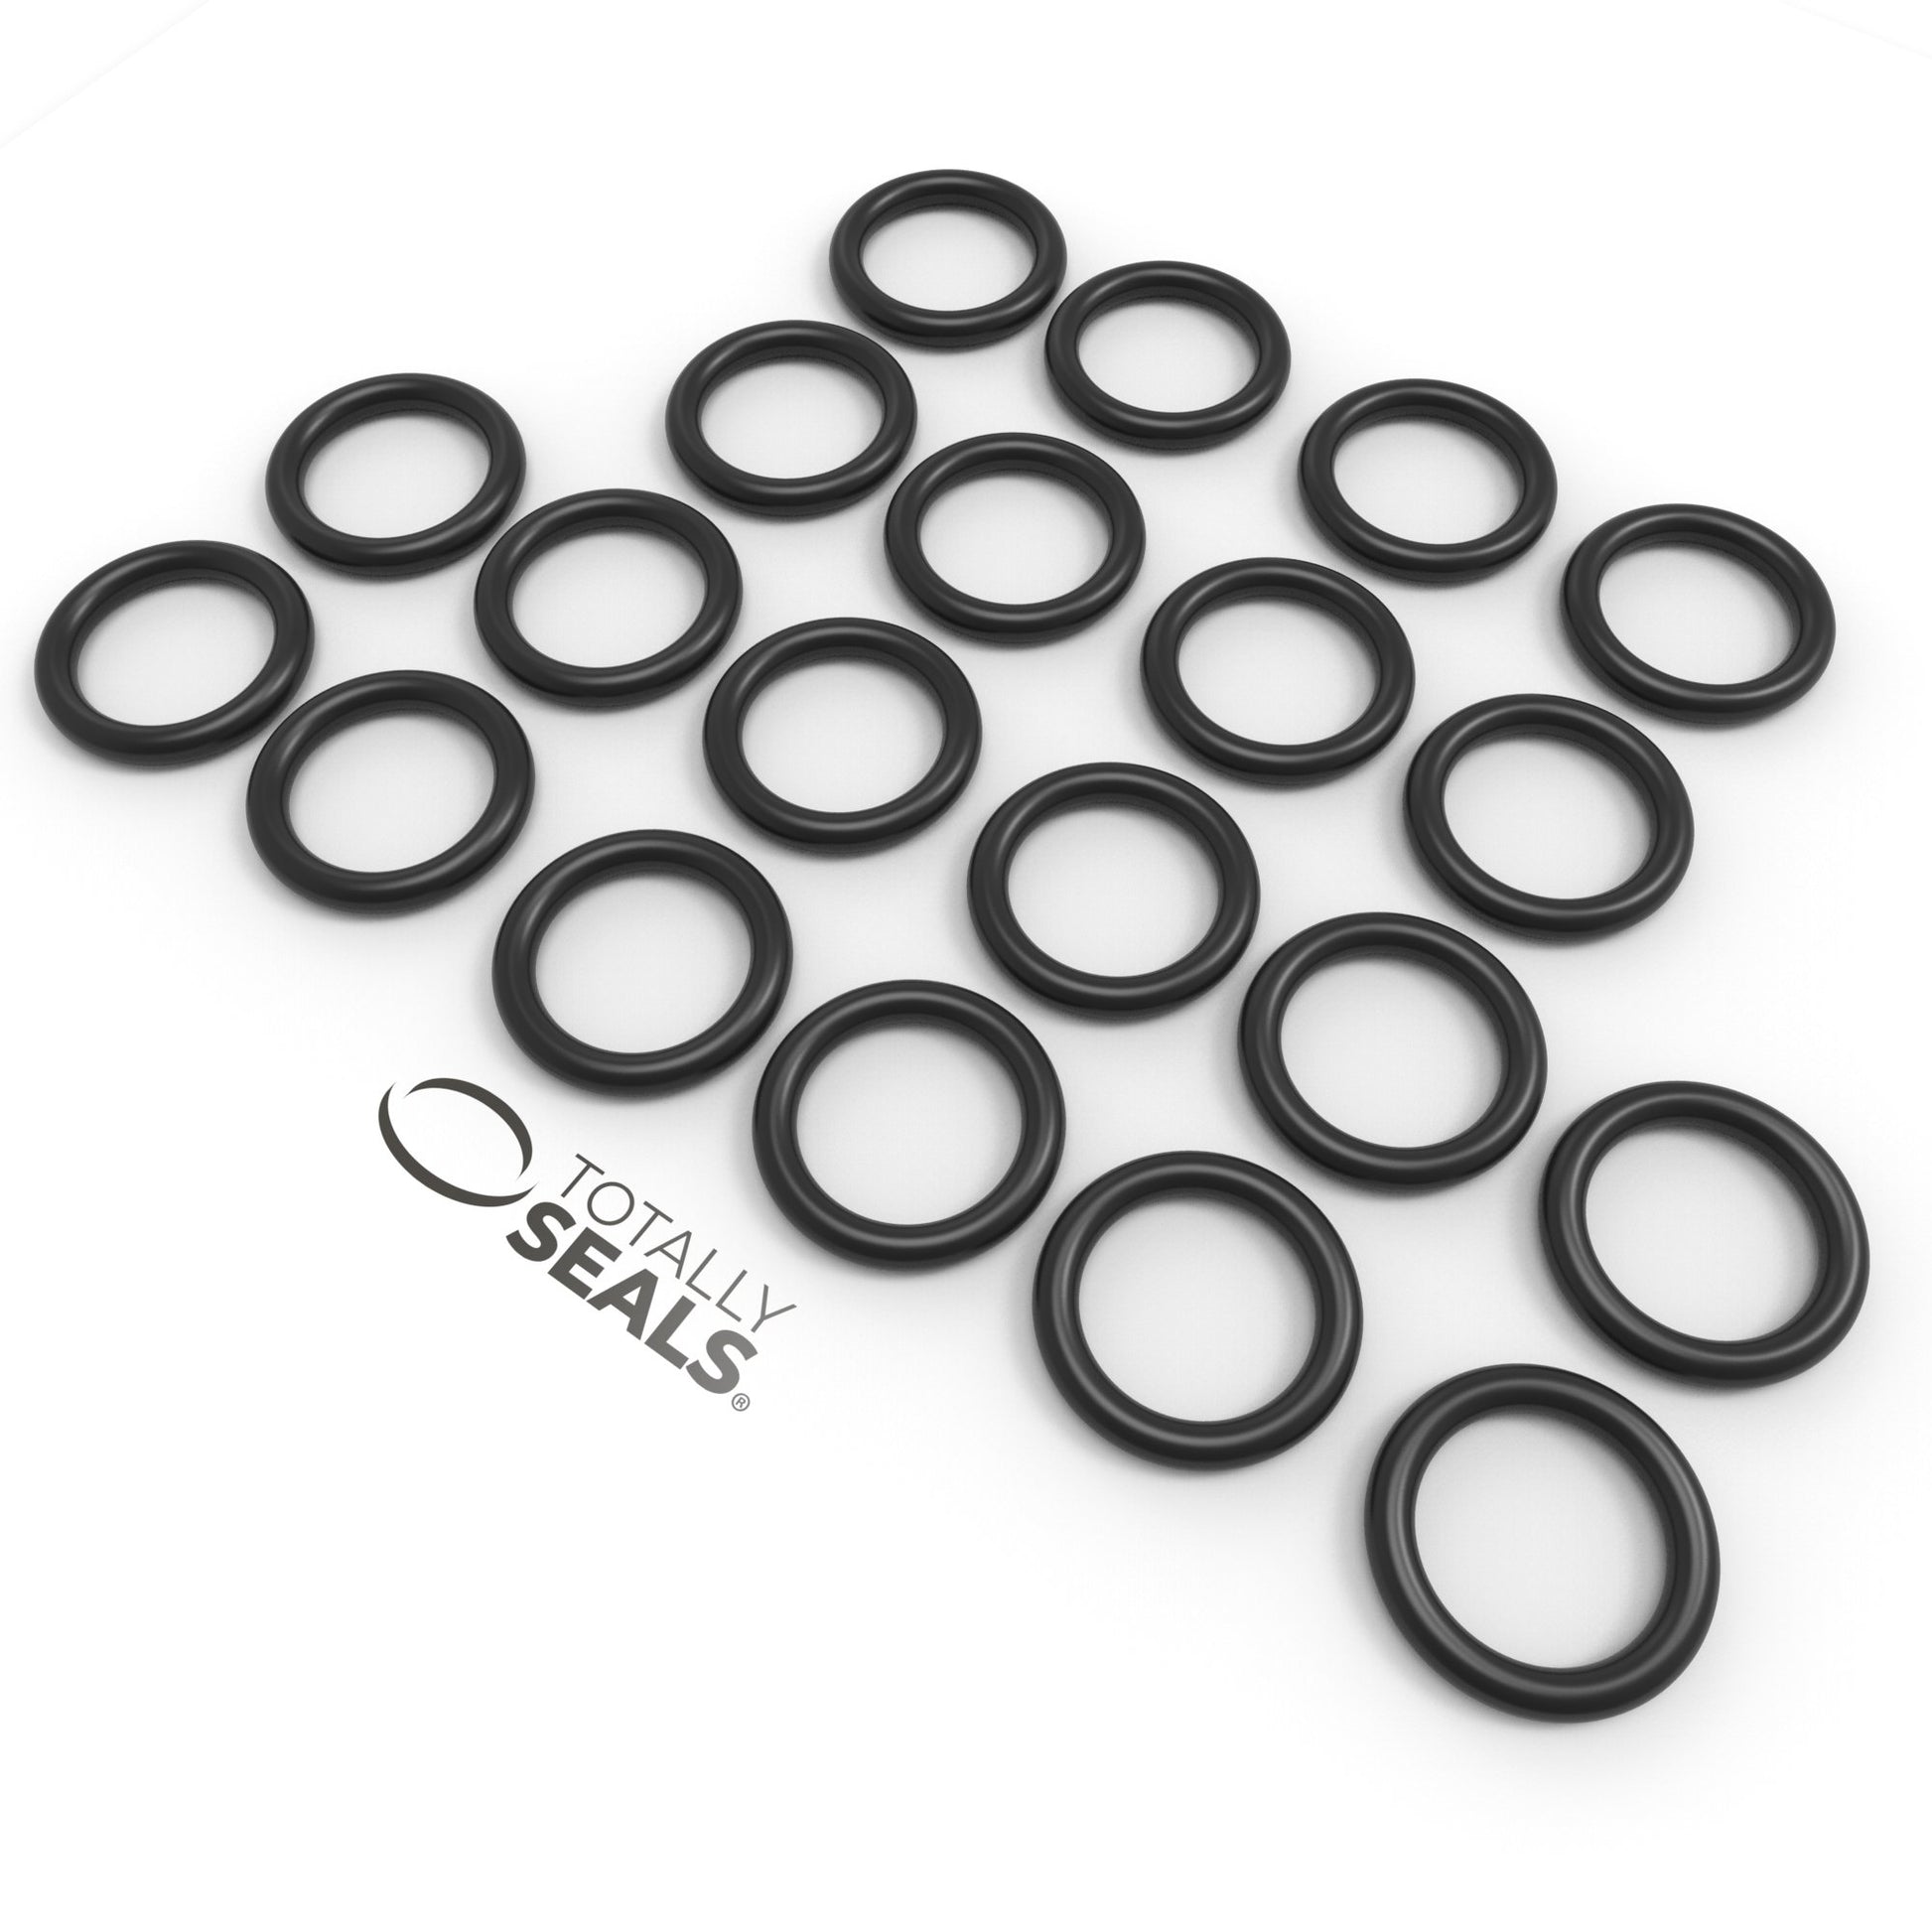 50mm x 3mm (56mm OD) Nitrile O-Rings - Totally Seals®